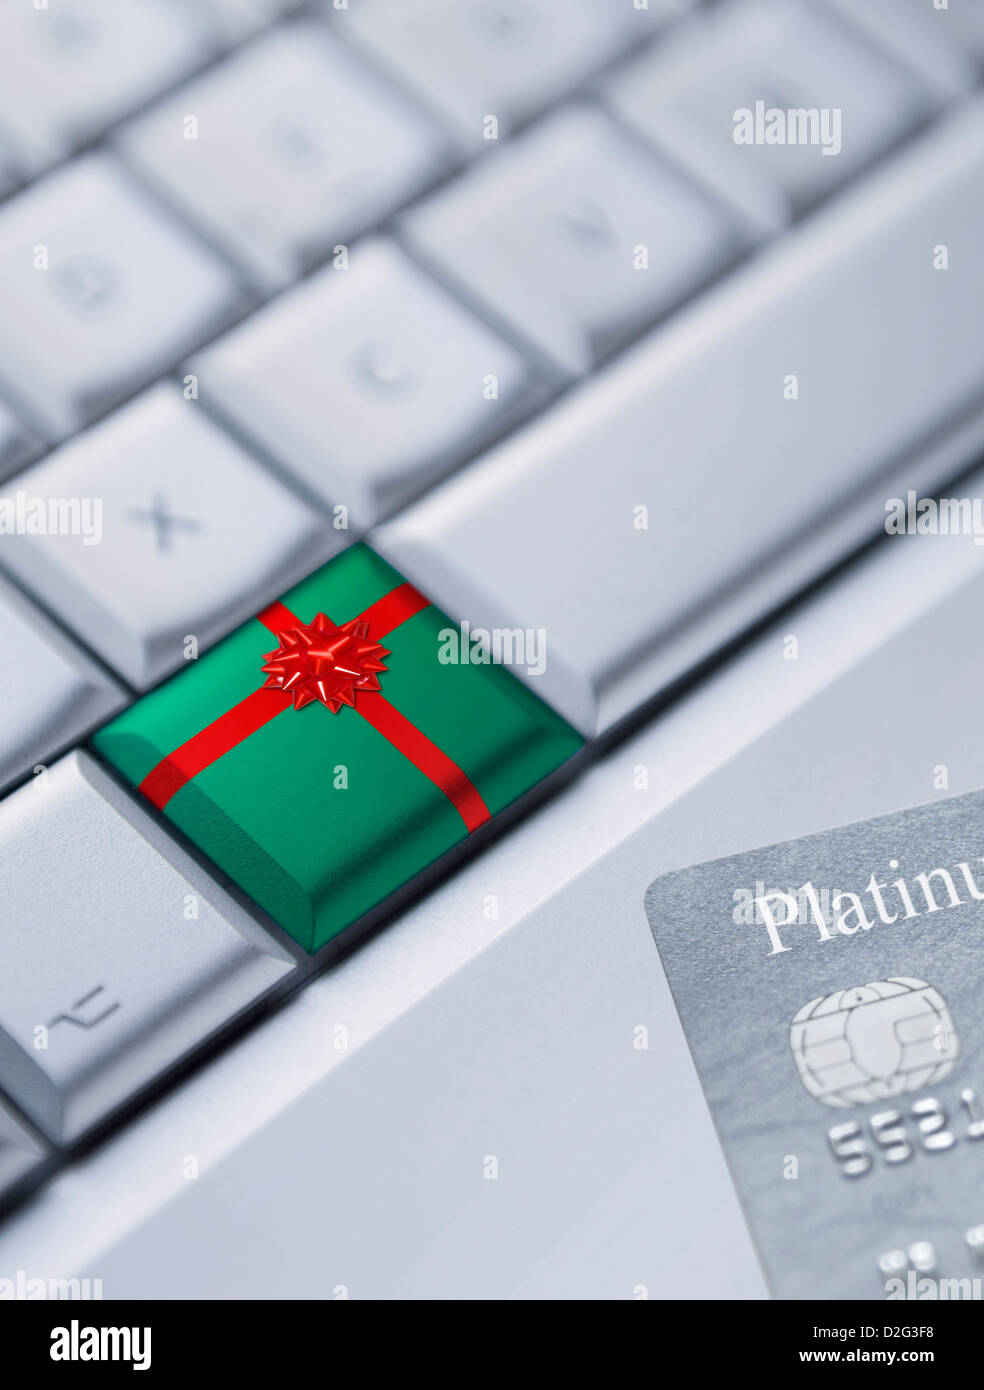 Detail of a keyboard with gift and a credit card online shopping concept Stock Photo